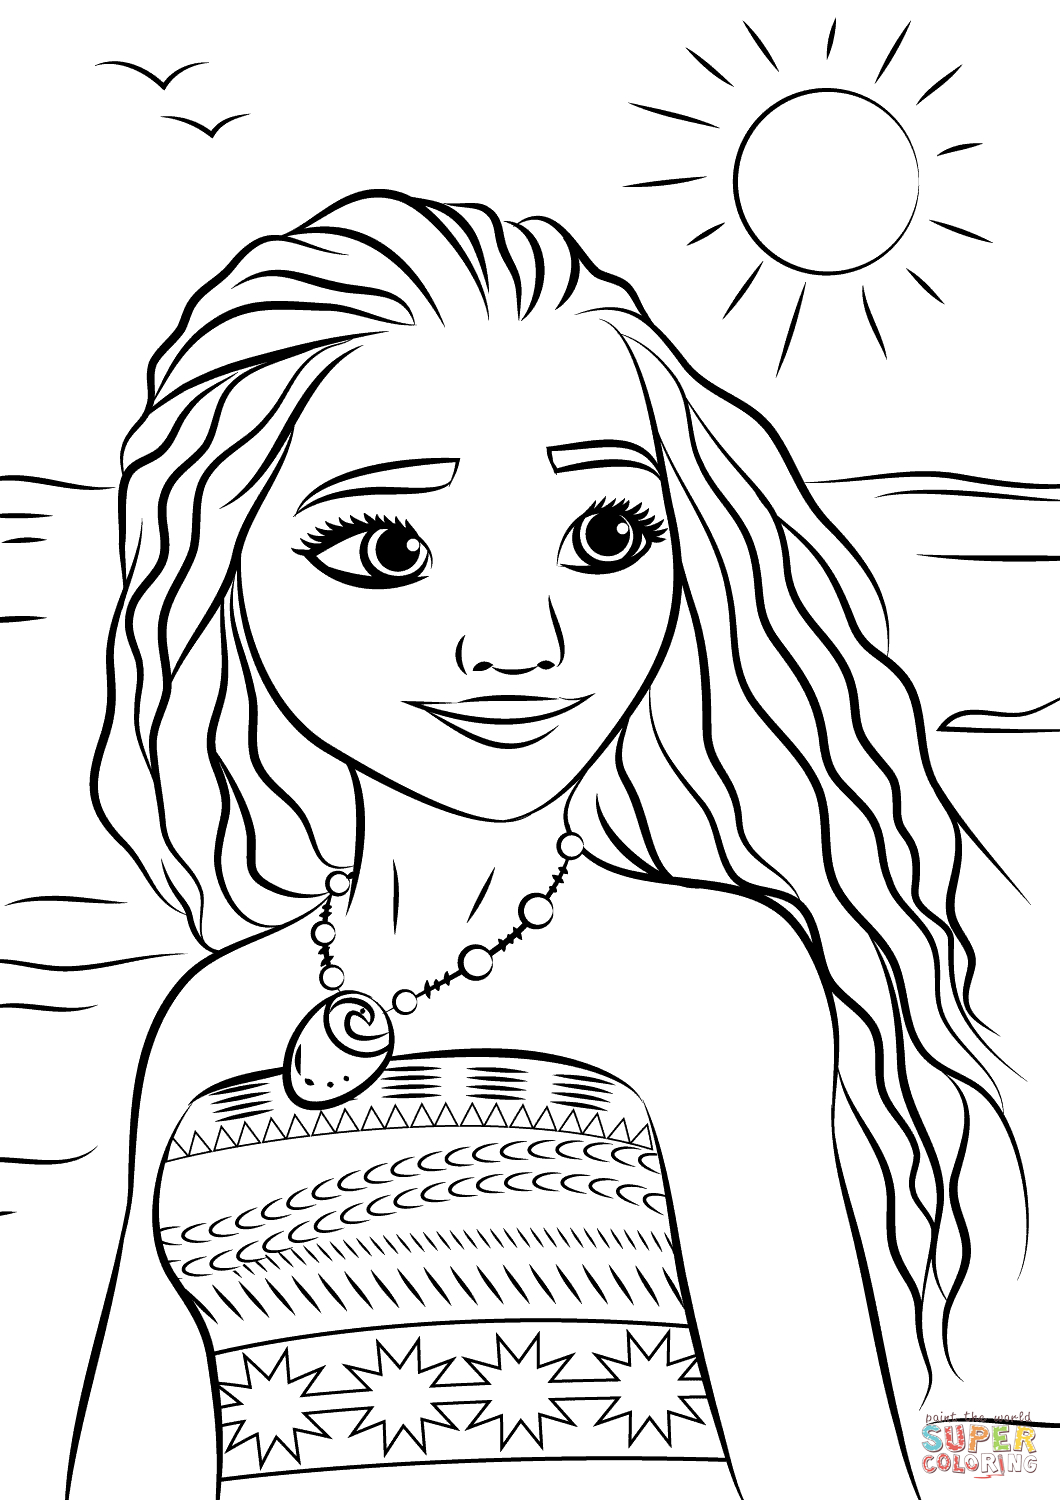 Princess Moana Portrait Coloring Page | Free Printable Coloring - Free Printable Pictures